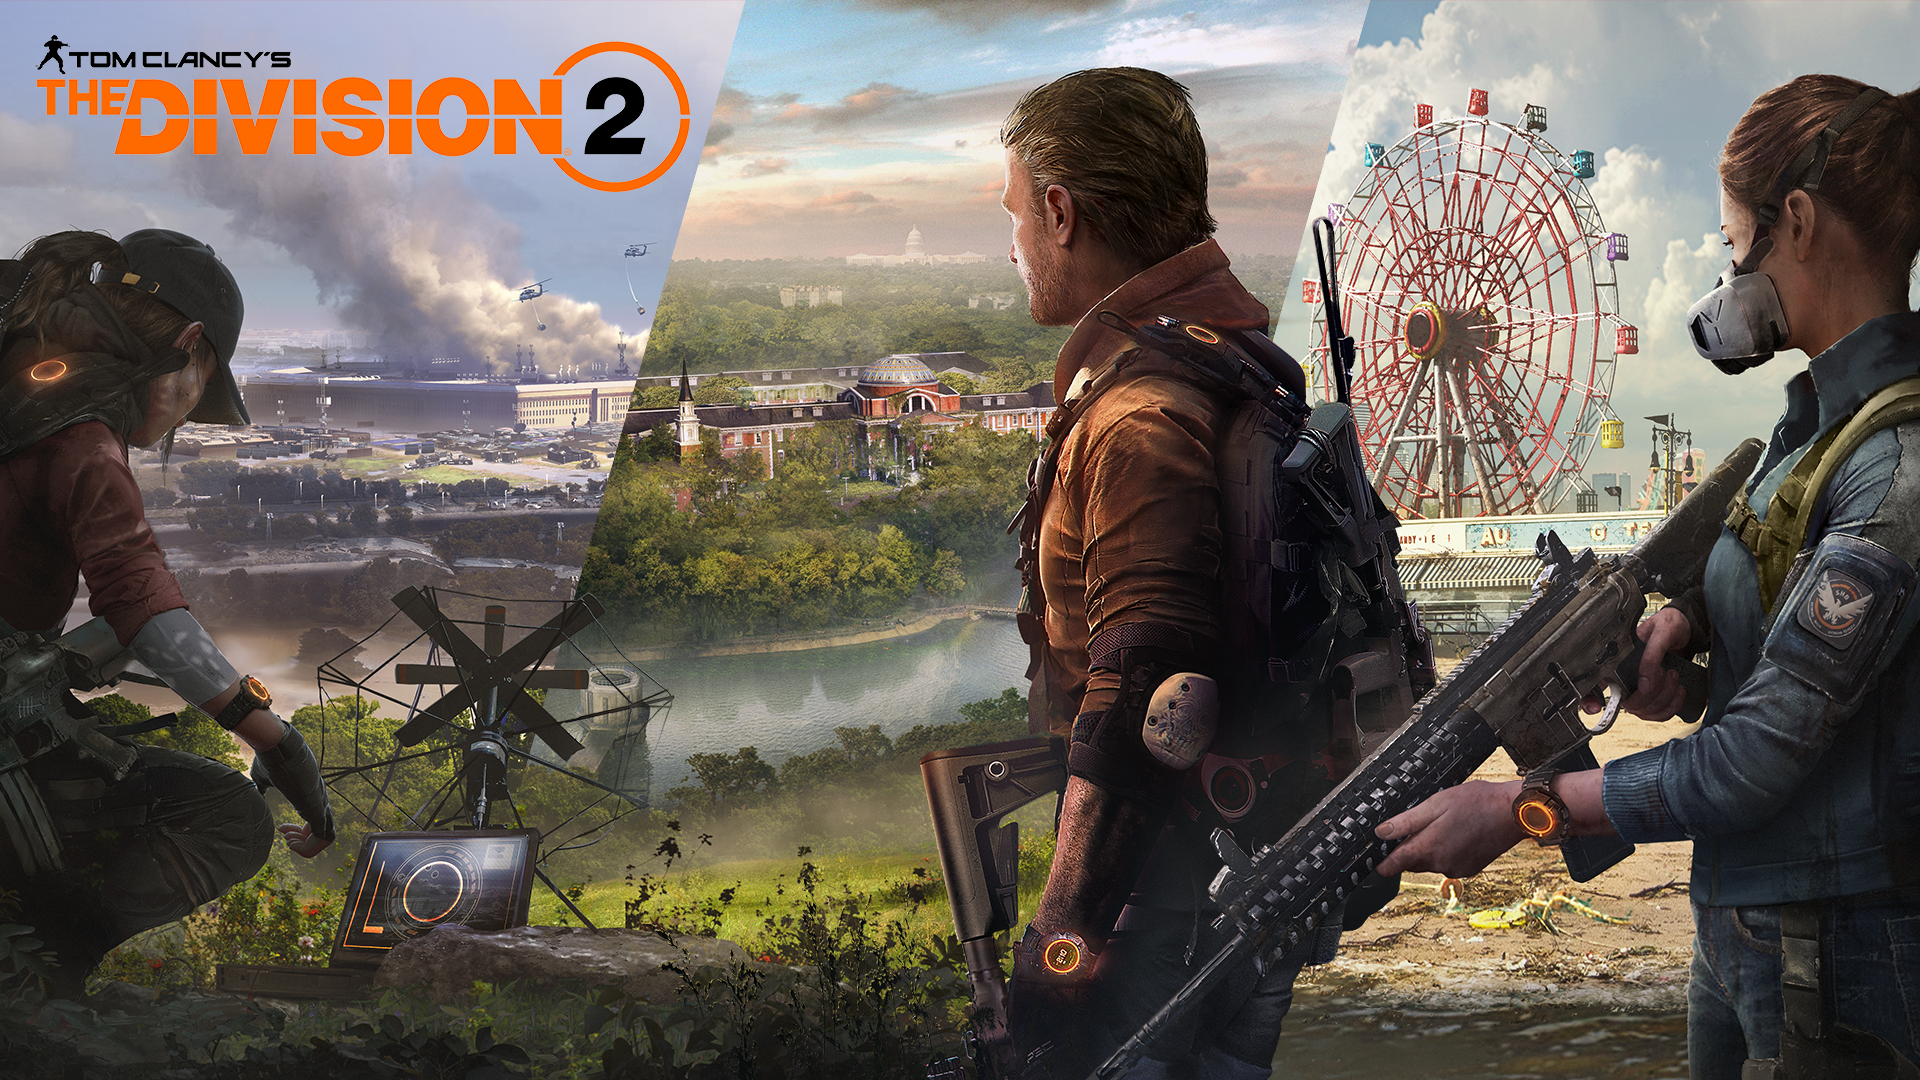 General 1920x1080 Tom Clancy's The Division 2 video game art PC gaming video games